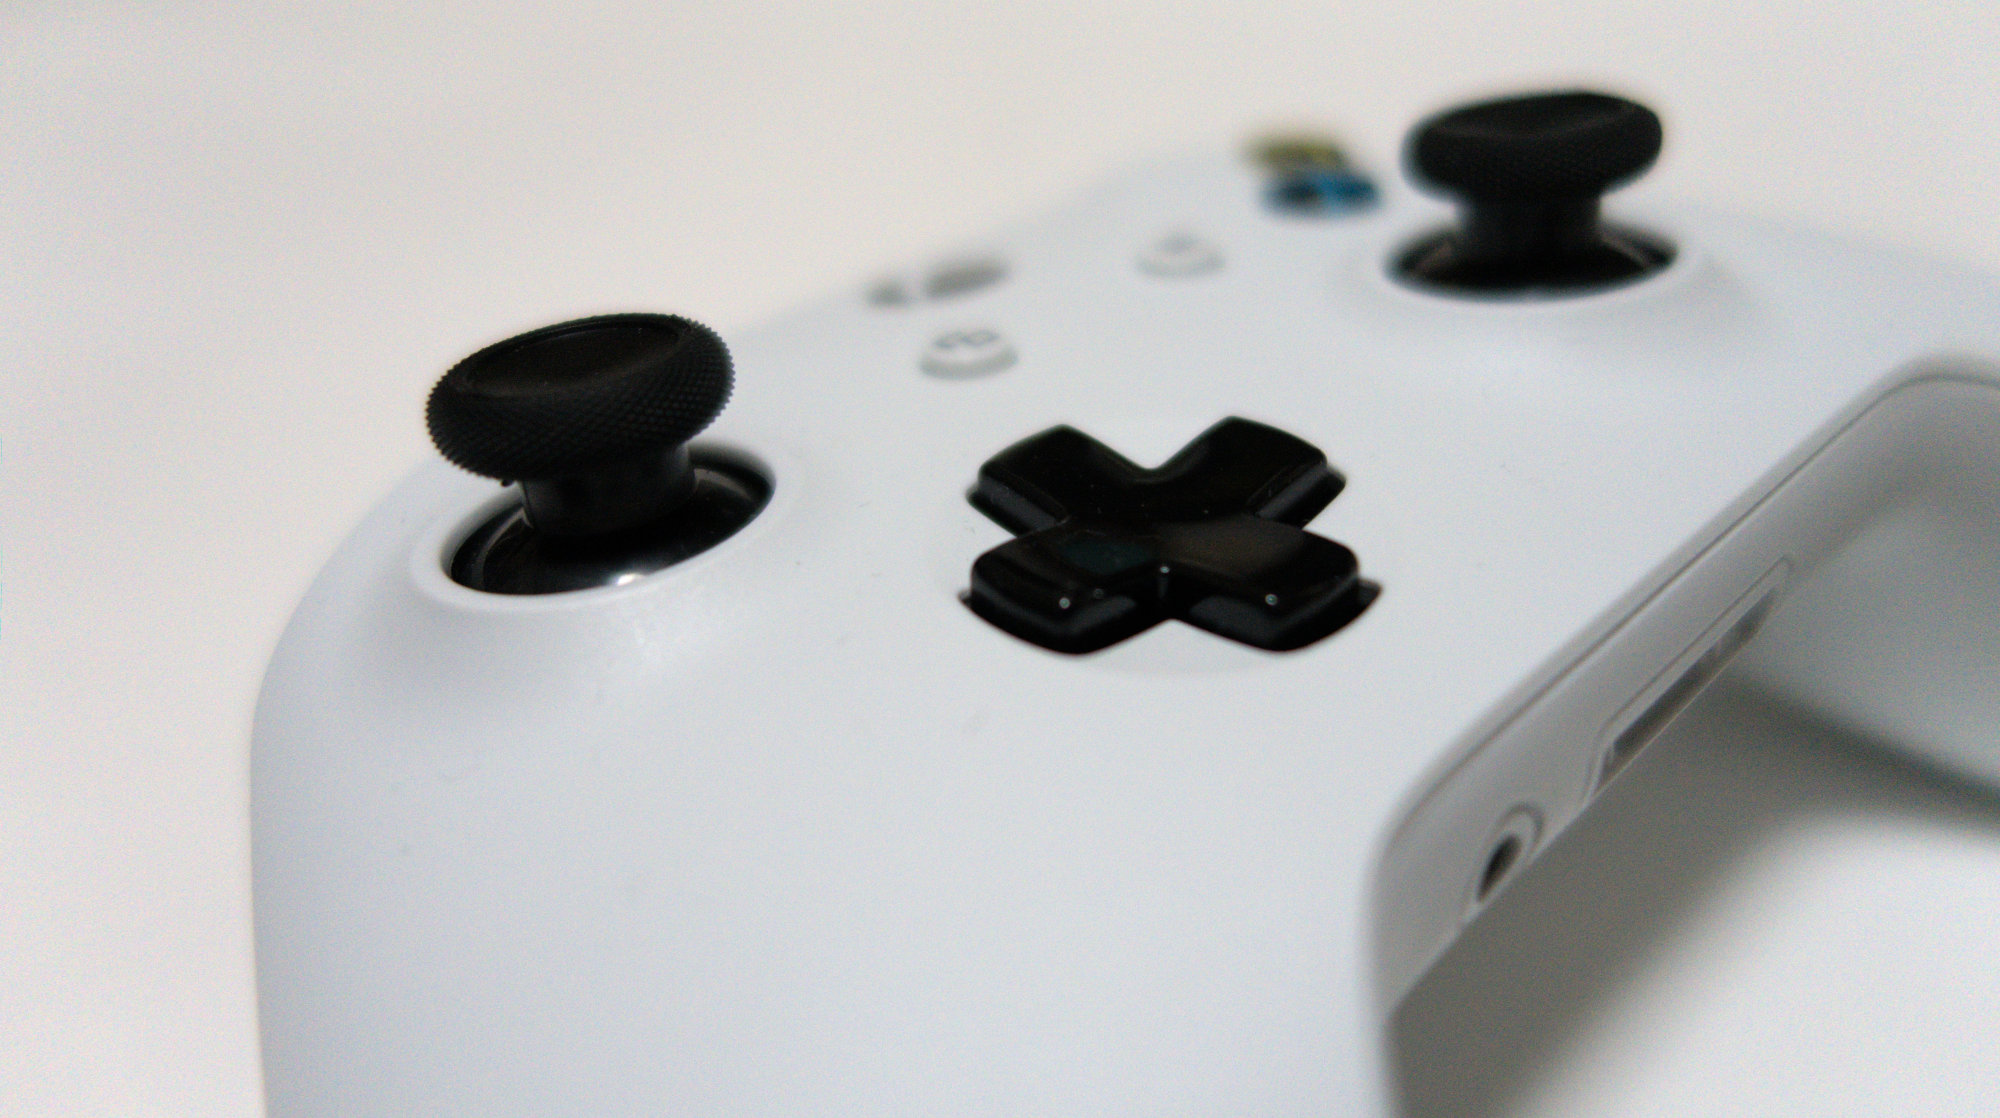 Xbox One Controller: A Perfected Xbox 360 GamePad